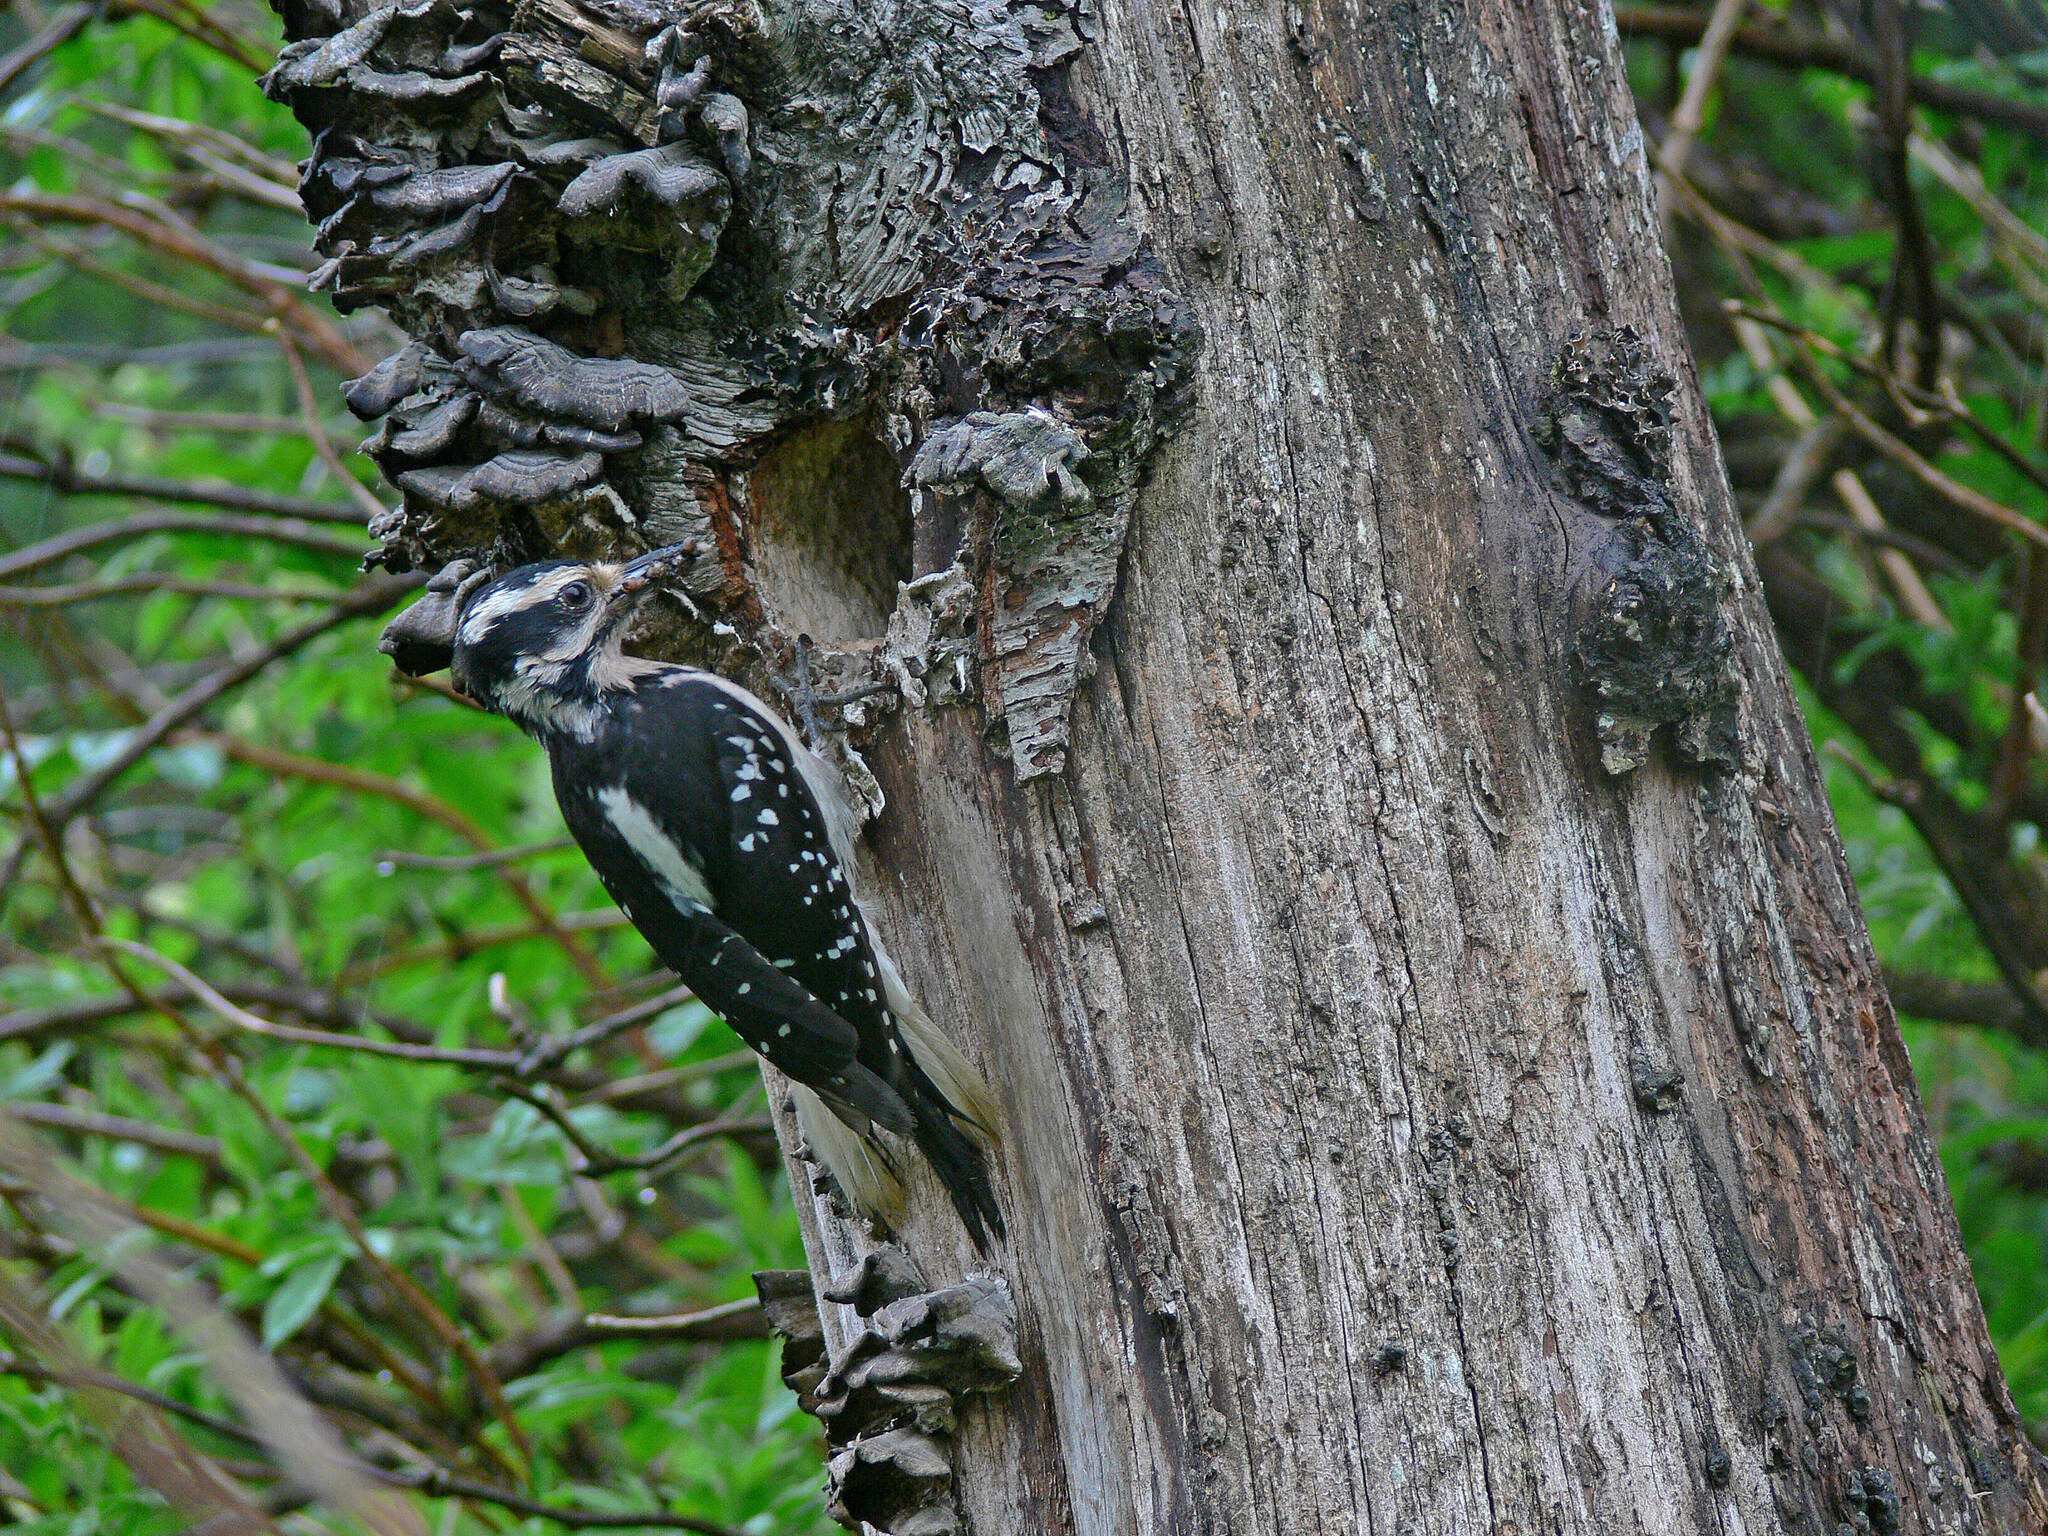 A female hairy woodpecker brings insect prey to chicks in an excavated nest cavity. (Courtesy Photo / Bob Armstrong)